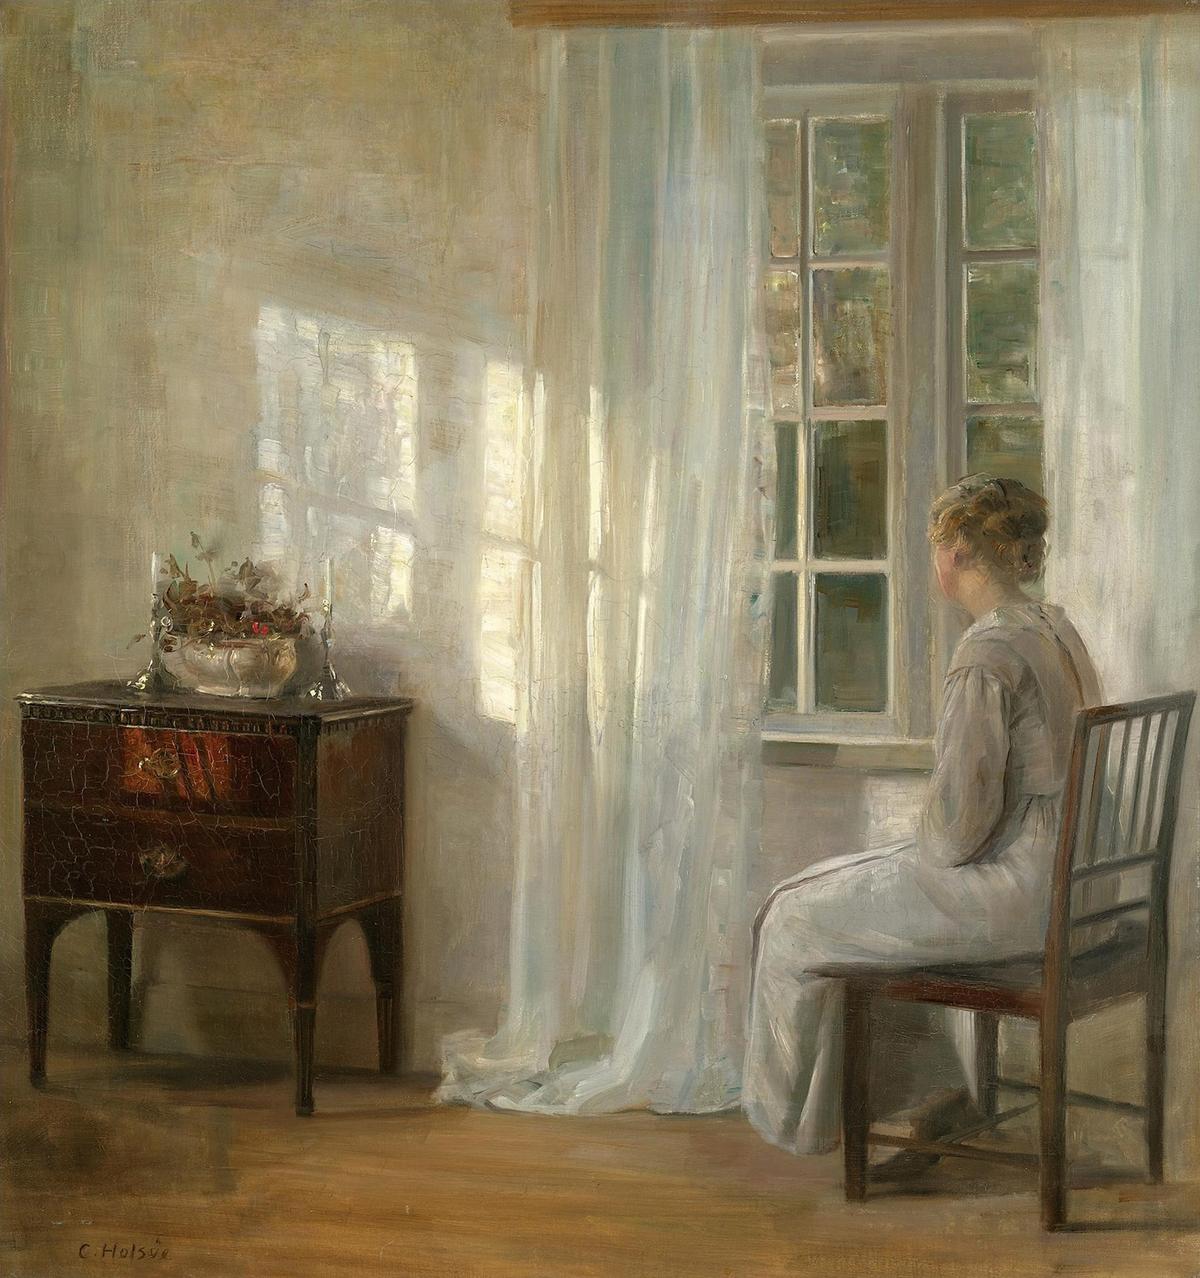 Do we wait with expectations or in a state of hopelessness? "Waiting by the Window," before 1935, by Carl Holsoe. (Public Domain)